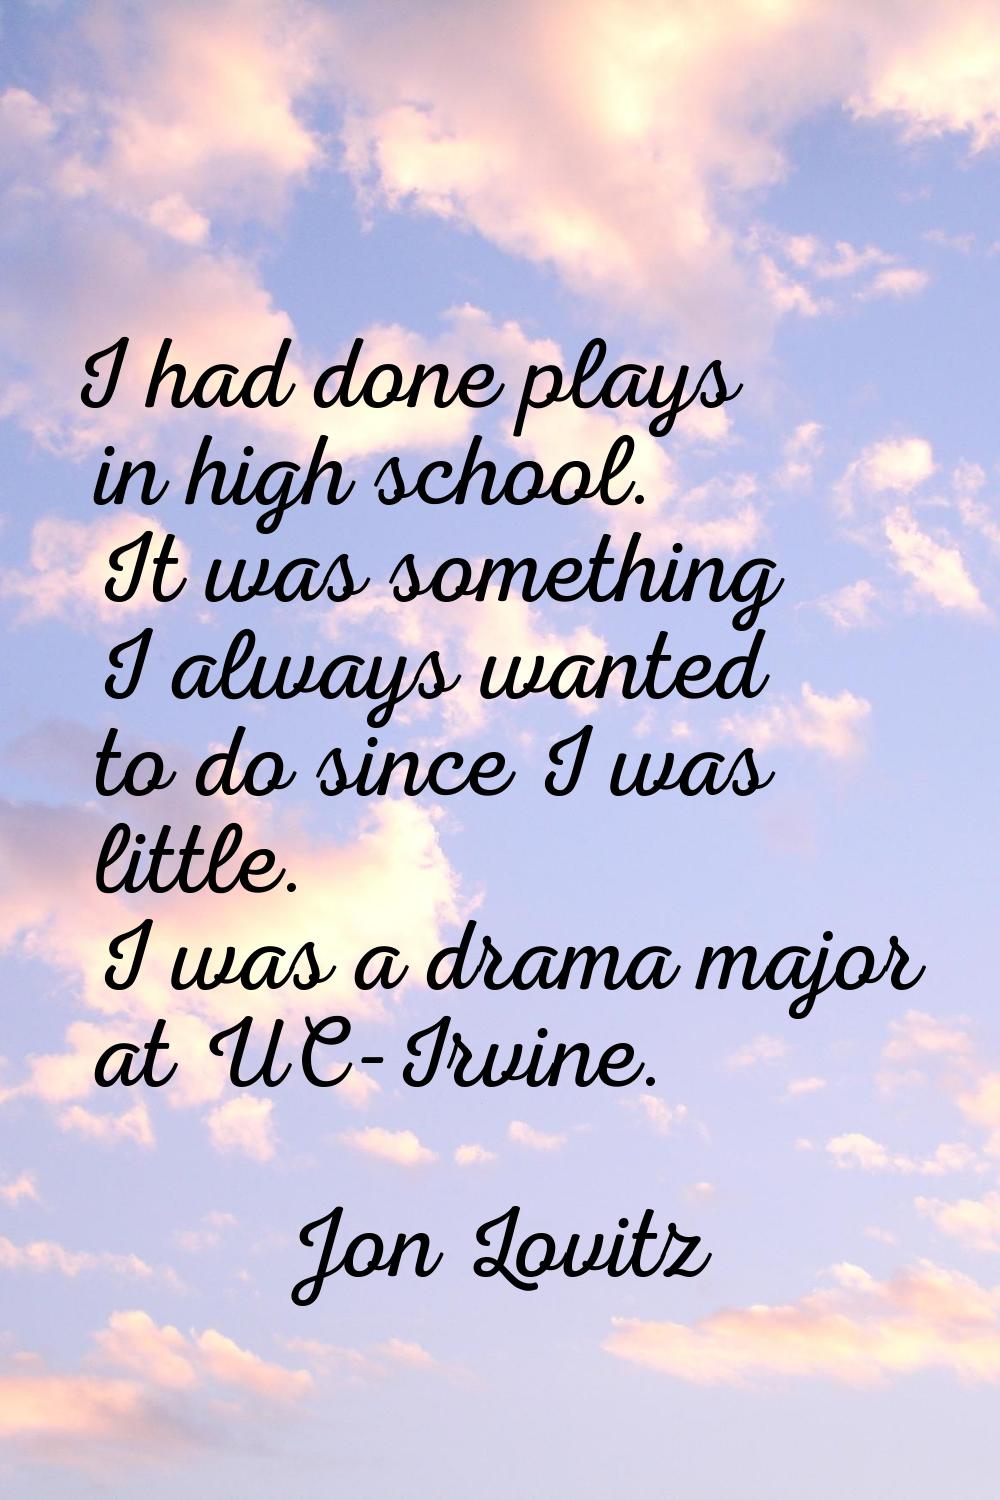 I had done plays in high school. It was something I always wanted to do since I was little. I was a